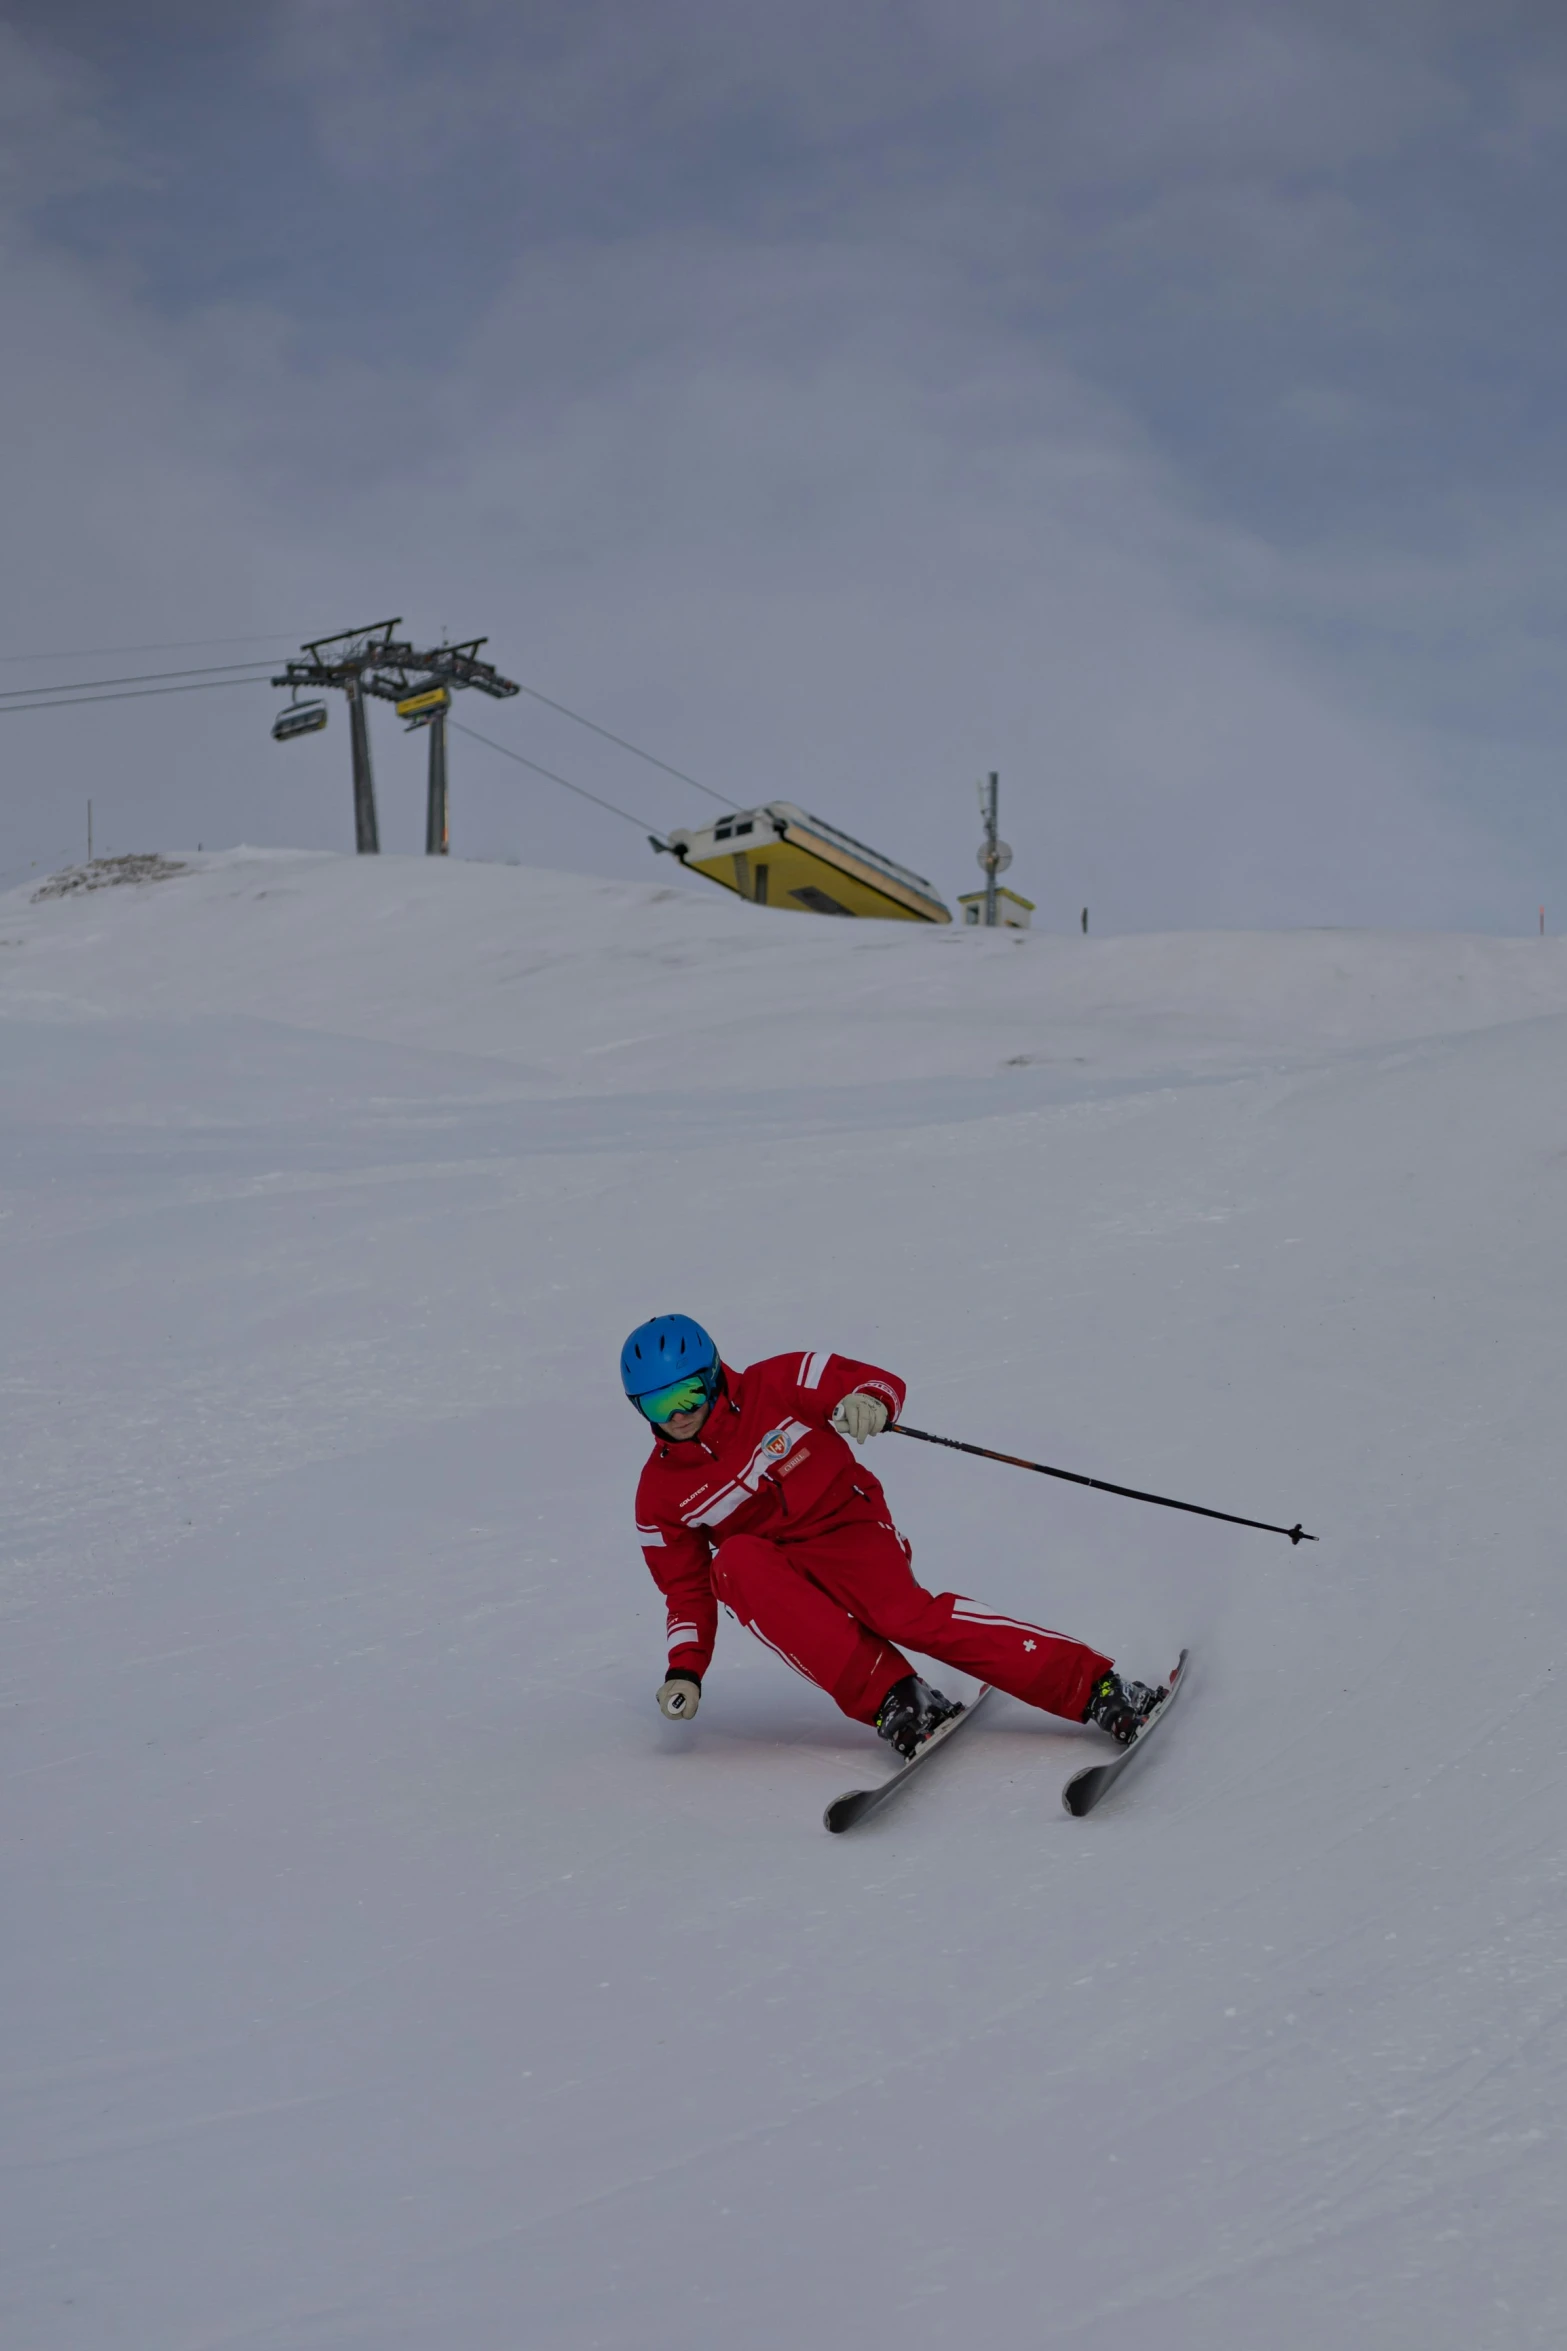 a person on skis is going down the hill